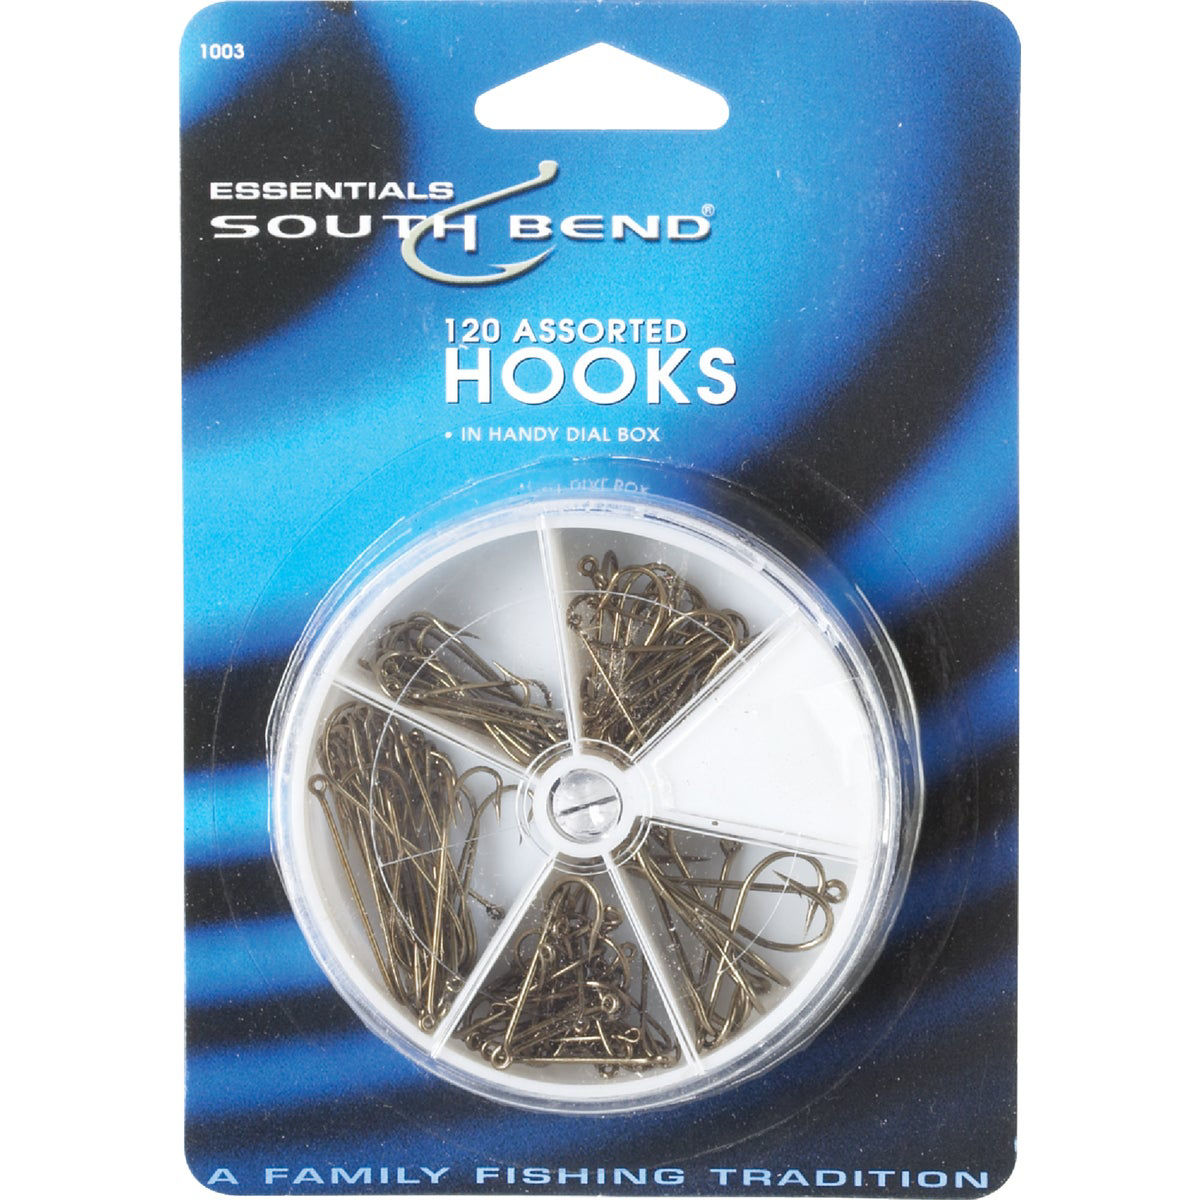 SouthBend 120-Piece Assorted Fishing Hook Kit